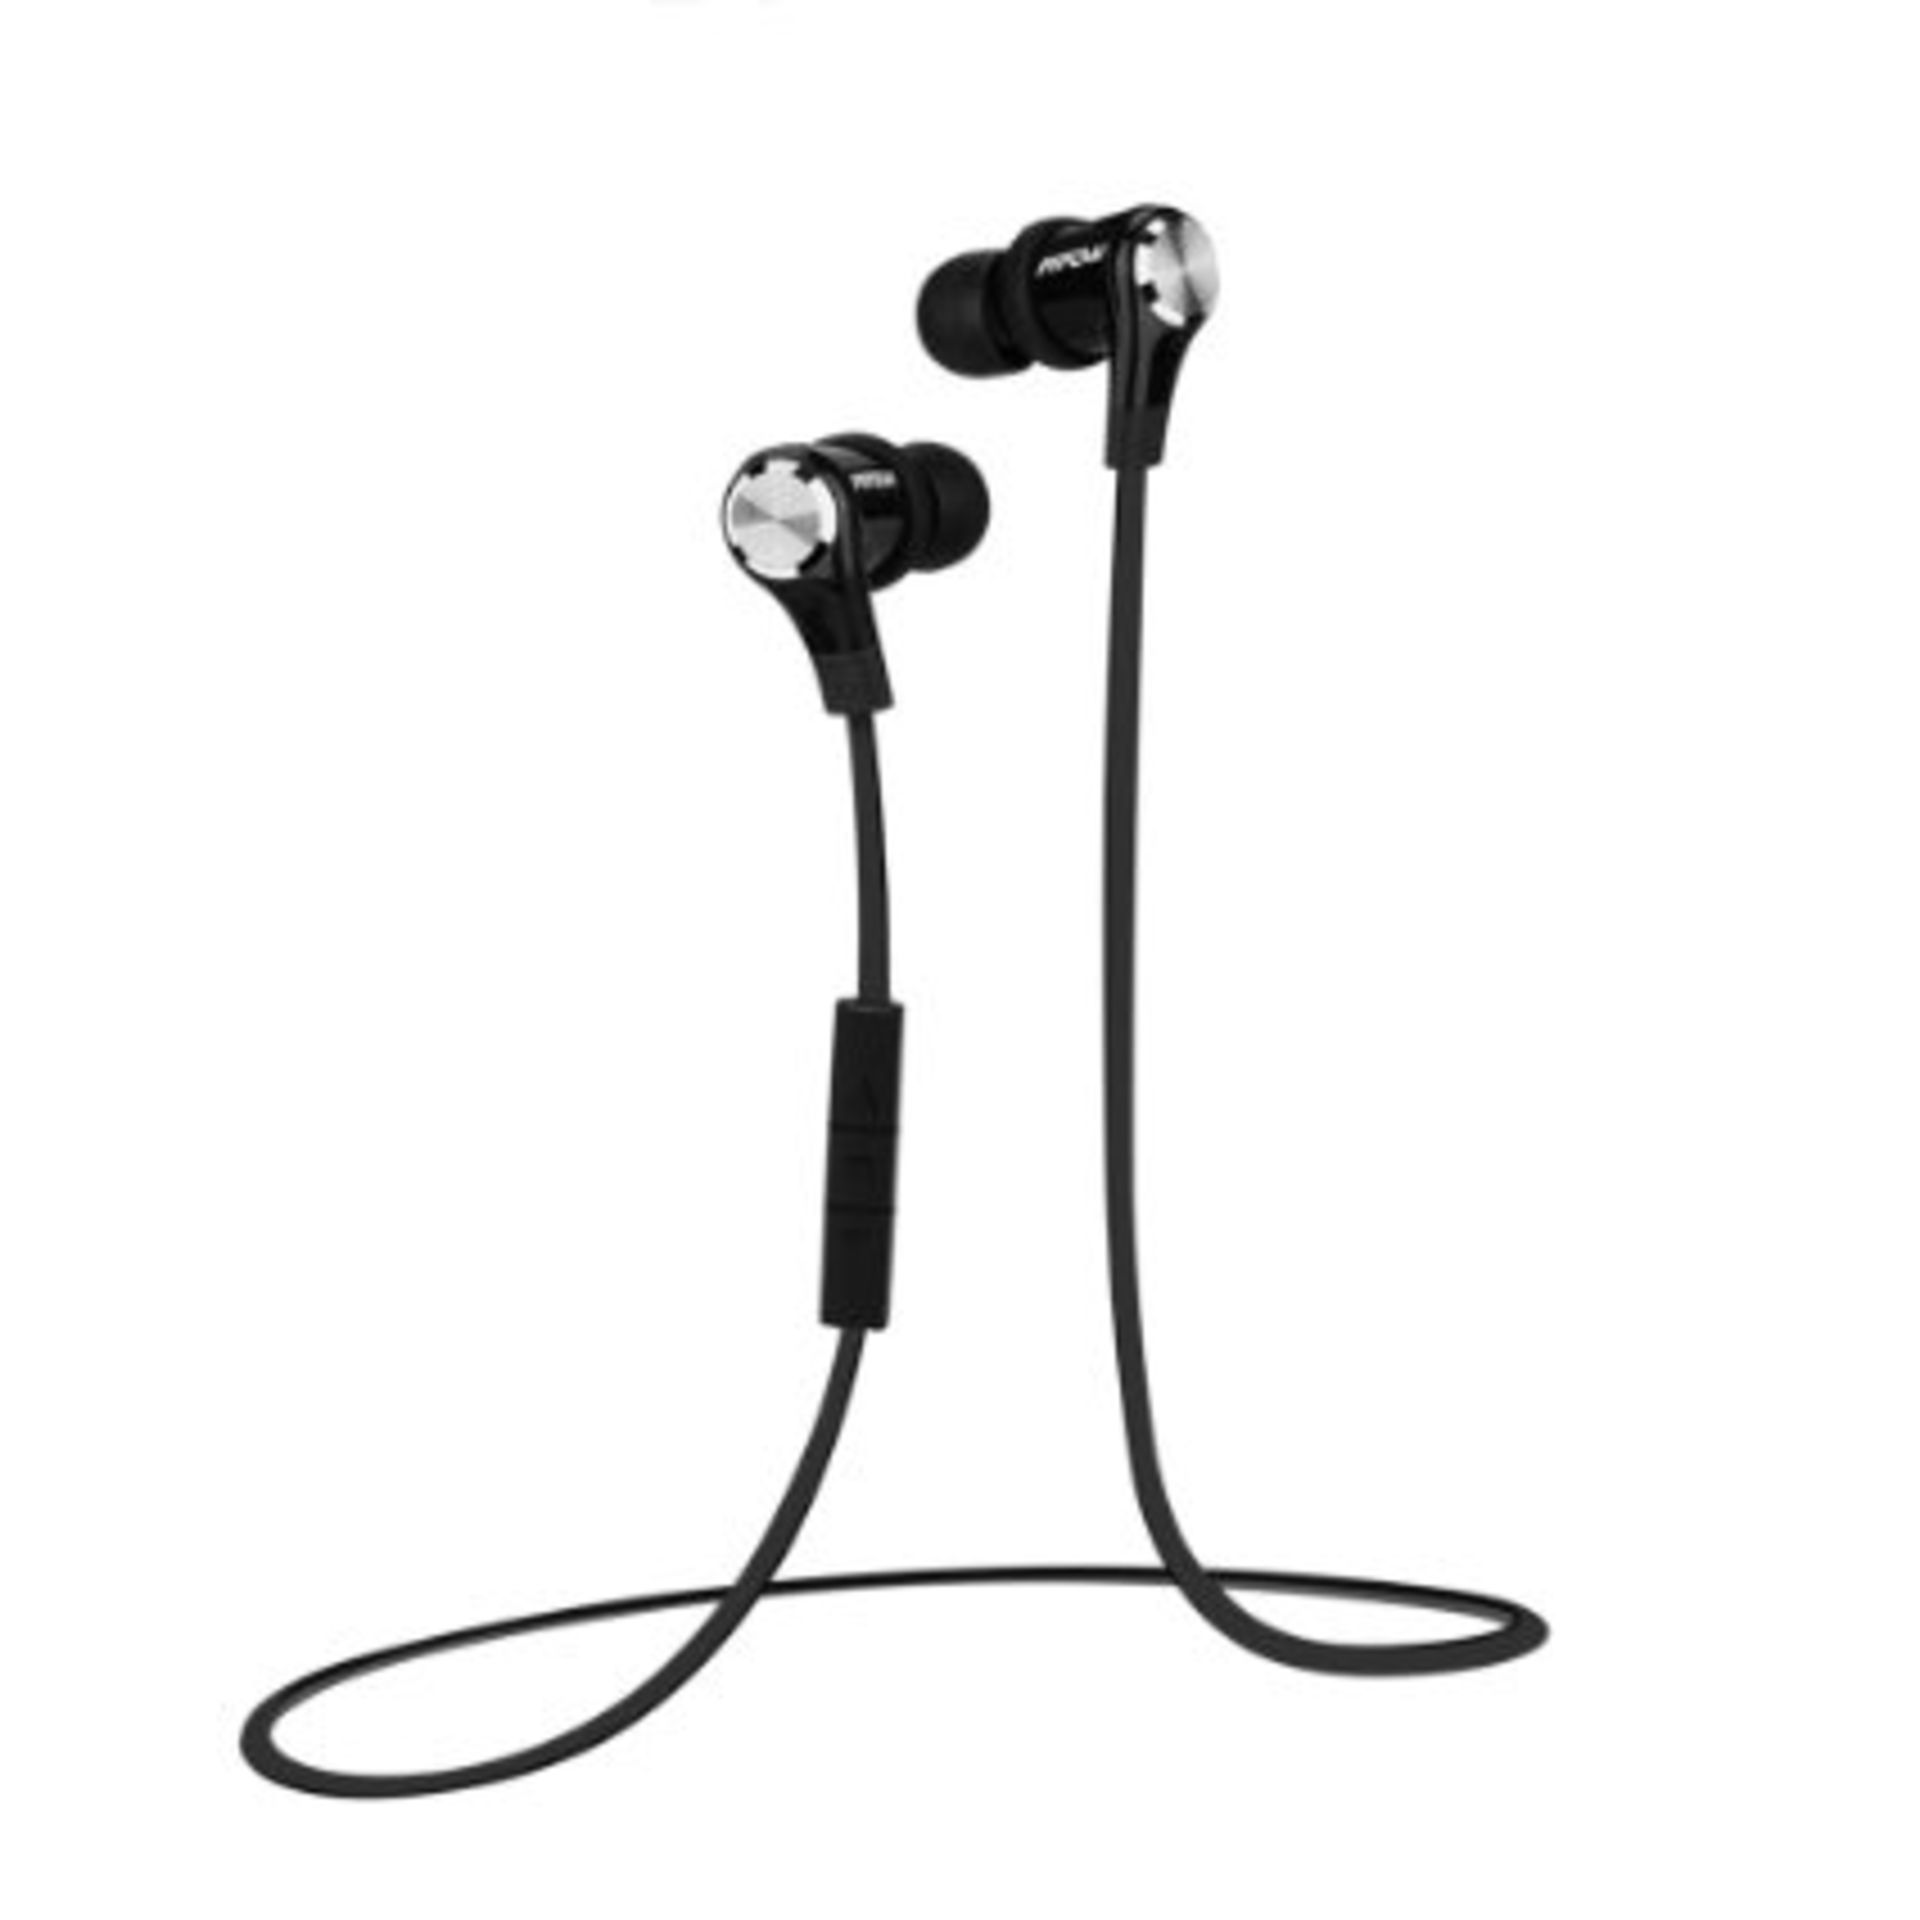 V Grade A Pair of Bluetooth Earphones/Headset (All Boxed) - Colours and Styles/Makes May Vary - Some - Image 2 of 7